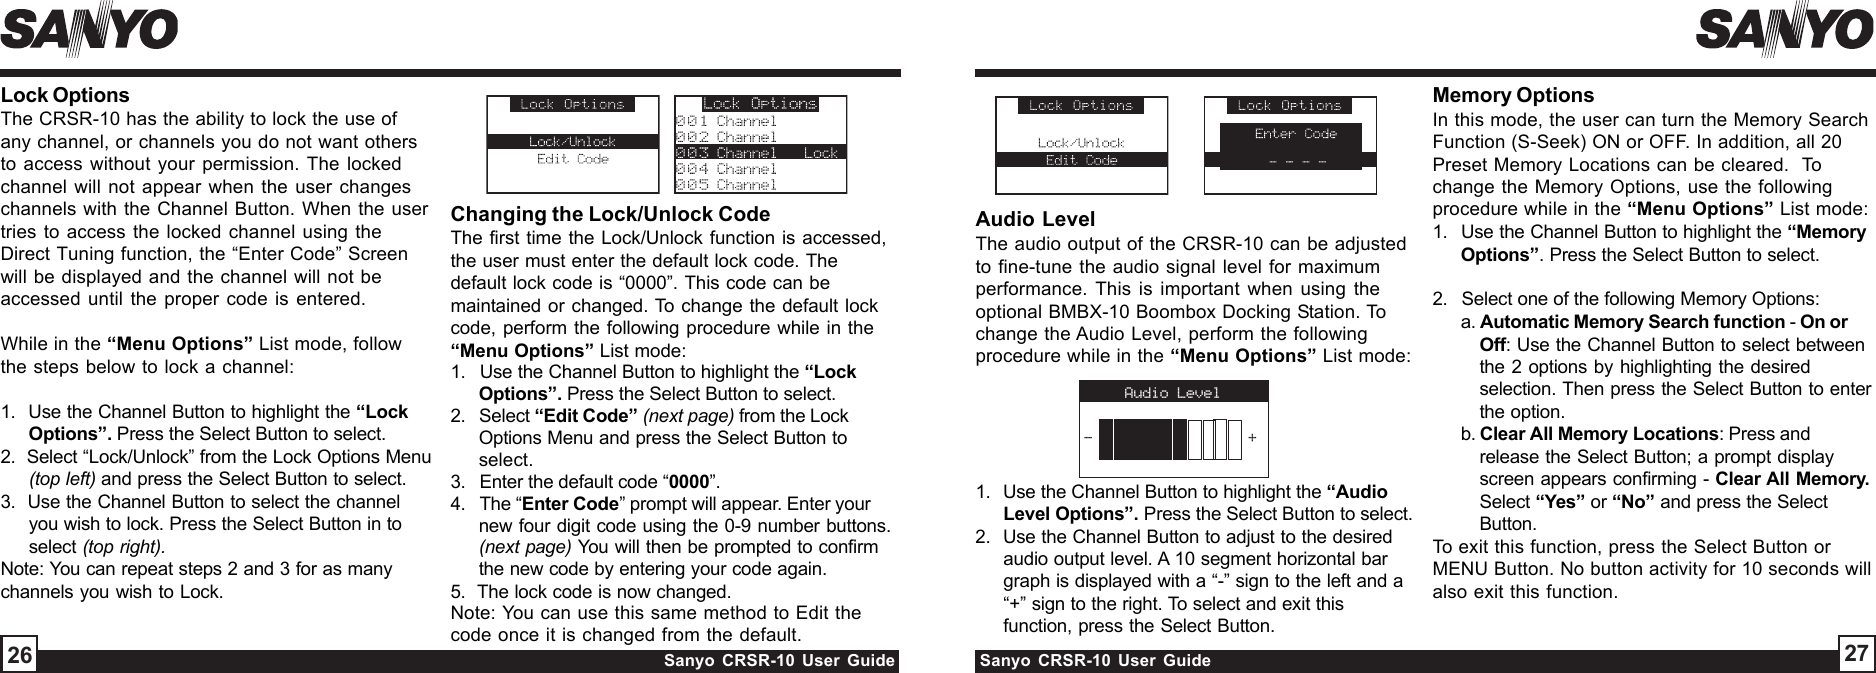 Sanyo CRSR-10 User Guide Sanyo CRSR-10 User GuideChanging the Lock/Unlock CodeThe first time the Lock/Unlock function is accessed,the user must enter the default lock code. Thedefault lock code is “0000”. This code can bemaintained or changed. To change the default lockcode, perform the following procedure while in the“Menu Options” List mode:1.   Use the Channel Button to highlight the “LockOptions”. Press the Select Button to select.2.   Select “Edit Code” (next page) from the LockOptions Menu and press the Select Button toselect.3.   Enter the default code “0000”.4.   The “Enter Code” prompt will appear. Enter yournew four digit code using the 0-9 number buttons.(next page) You will then be prompted to confirmthe new code by entering your code again.5.  The lock code is now changed.Note: You can use this same method to Edit thecode once it is changed from the default.Audio LevelThe audio output of the CRSR-10 can be adjustedto fine-tune the audio signal level for maximumperformance. This is important when using theoptional BMBX-10 Boombox Docking Station. Tochange the Audio Level, perform the followingprocedure while in the “Menu Options” List mode:1.   Use the Channel Button to highlight the “AudioLevel Options”. Press the Select Button to select.2.   Use the Channel Button to adjust to the desiredaudio output level. A 10 segment horizontal bargraph is displayed with a “-” sign to the left and a“+” sign to the right. To select and exit thisfunction, press the Select Button.2726Memory OptionsIn this mode, the user can turn the Memory SearchFunction (S-Seek) ON or OFF. In addition, all 20Preset Memory Locations can be cleared.  Tochange the Memory Options, use the followingprocedure while in the “Menu Options” List mode:1.   Use the Channel Button to highlight the “MemoryOptions”. Press the Select Button to select.2.   Select one of the following Memory Options:a. Automatic Memory Search function - On orOff: Use the Channel Button to select betweenthe 2 options by highlighting the desiredselection. Then press the Select Button to enterthe option.b. Clear All Memory Locations: Press andrelease the Select Button; a prompt displayscreen appears confirming - Clear All Memory.Select “Yes” or “No” and press the SelectButton.To exit this function, press the Select Button orMENU Button. No button activity for 10 seconds willalso exit this function.Lock OptionsThe CRSR-10 has the ability to lock the use ofany channel, or channels you do not want othersto access without your permission. The lockedchannel will not appear when the user changeschannels with the Channel Button. When the usertries to access the locked channel using theDirect Tuning function, the “Enter Code” Screenwill be displayed and the channel will not beaccessed until the proper code is entered.While in the “Menu Options” List mode, followthe steps below to lock a channel:1.  Use the Channel Button to highlight the “LockOptions”. Press the Select Button to select.2.  Select “Lock/Unlock” from the Lock Options Menu(top left) and press the Select Button to select.3.  Use the Channel Button to select the channelyou wish to lock. Press the Select Button in toselect (top right).Note: You can repeat steps 2 and 3 for as manychannels you wish to Lock.Audio Level-+